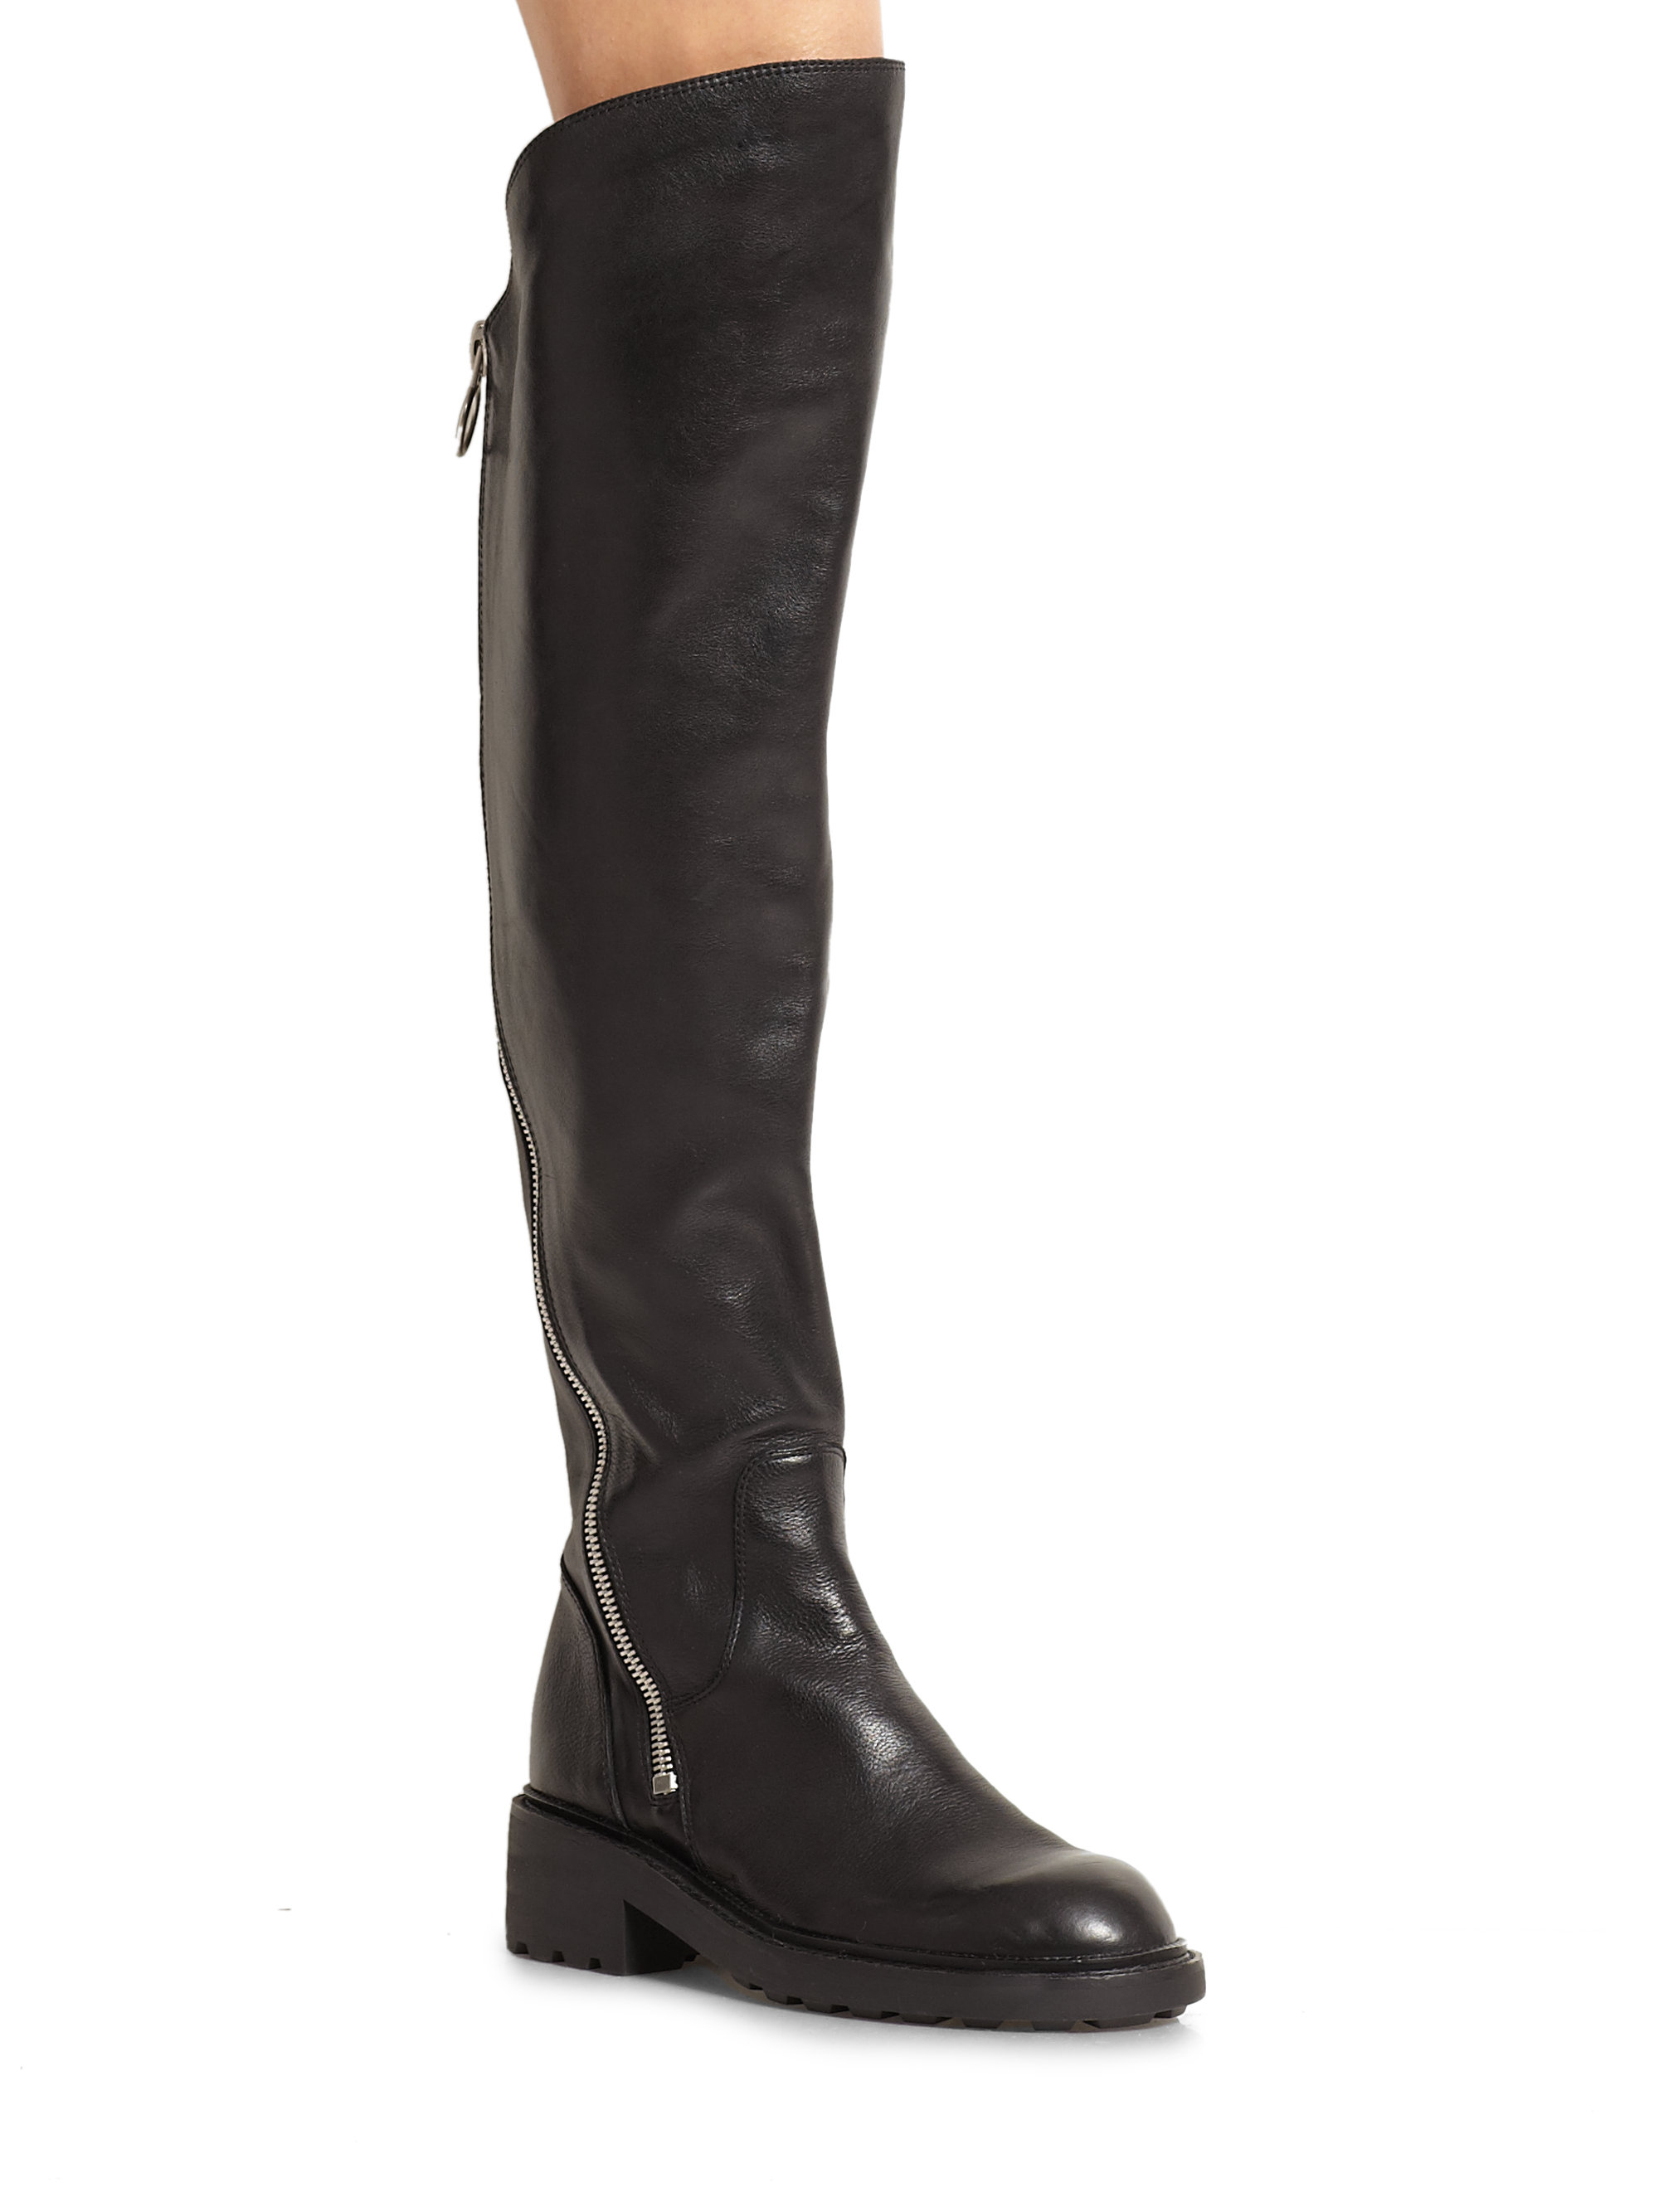 Ash Seven Leather Over-The-Knee Zipper Boots in Black - Lyst